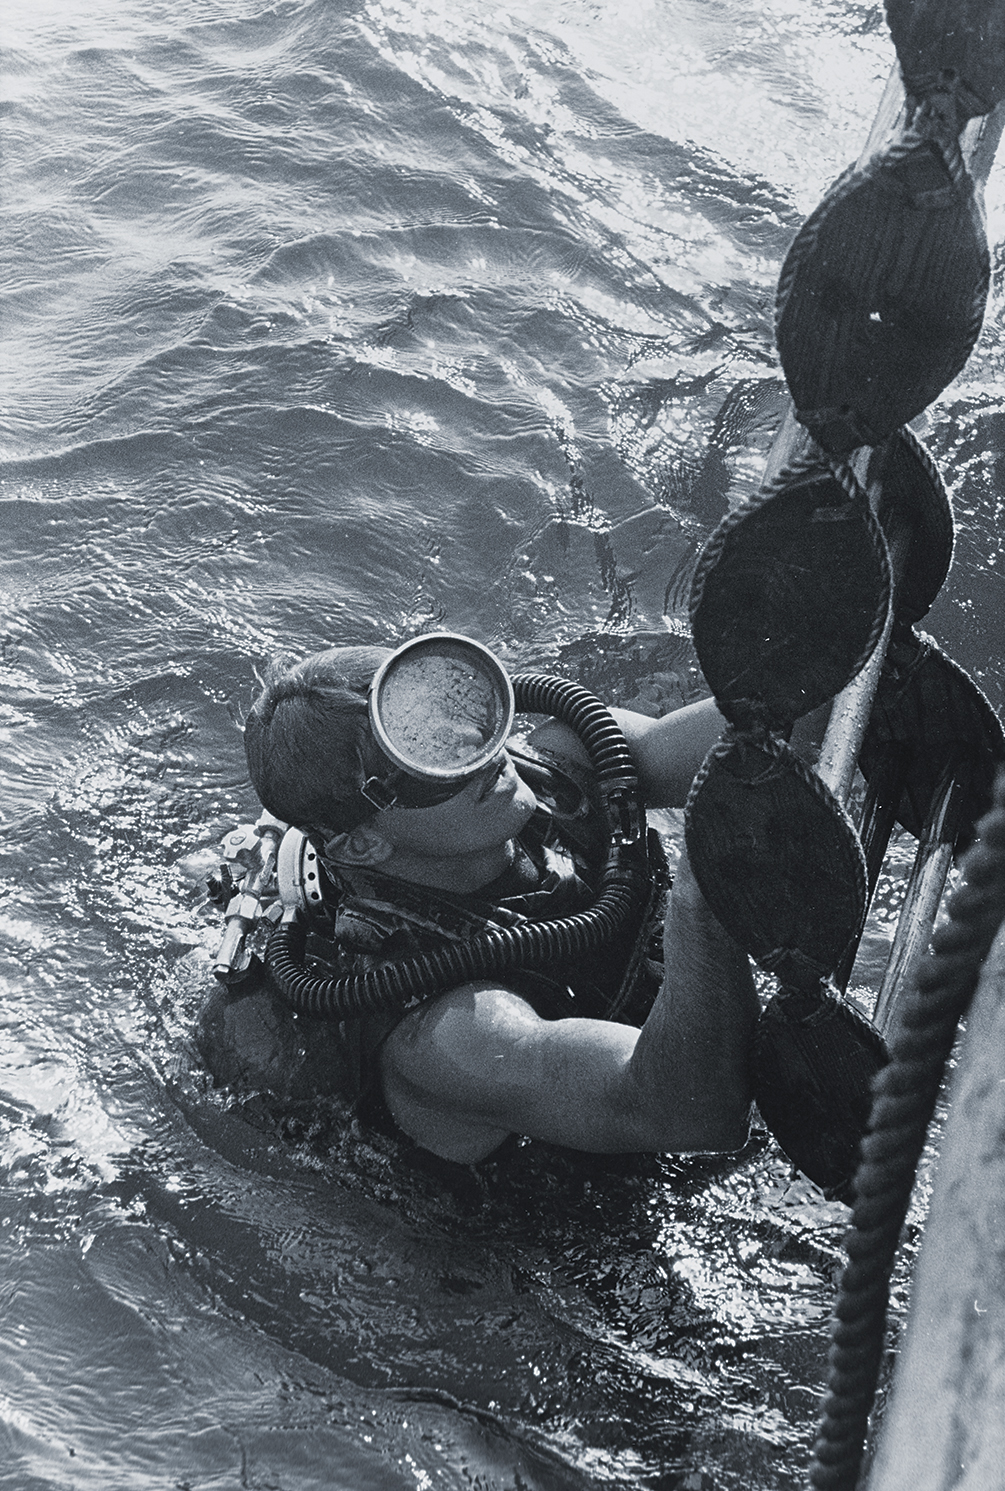 Photo of a U.S. Navy SEAL surfacing from a dive. SEALs and UDT divers were tasked with getting ashore and guiding the POWs to safety.